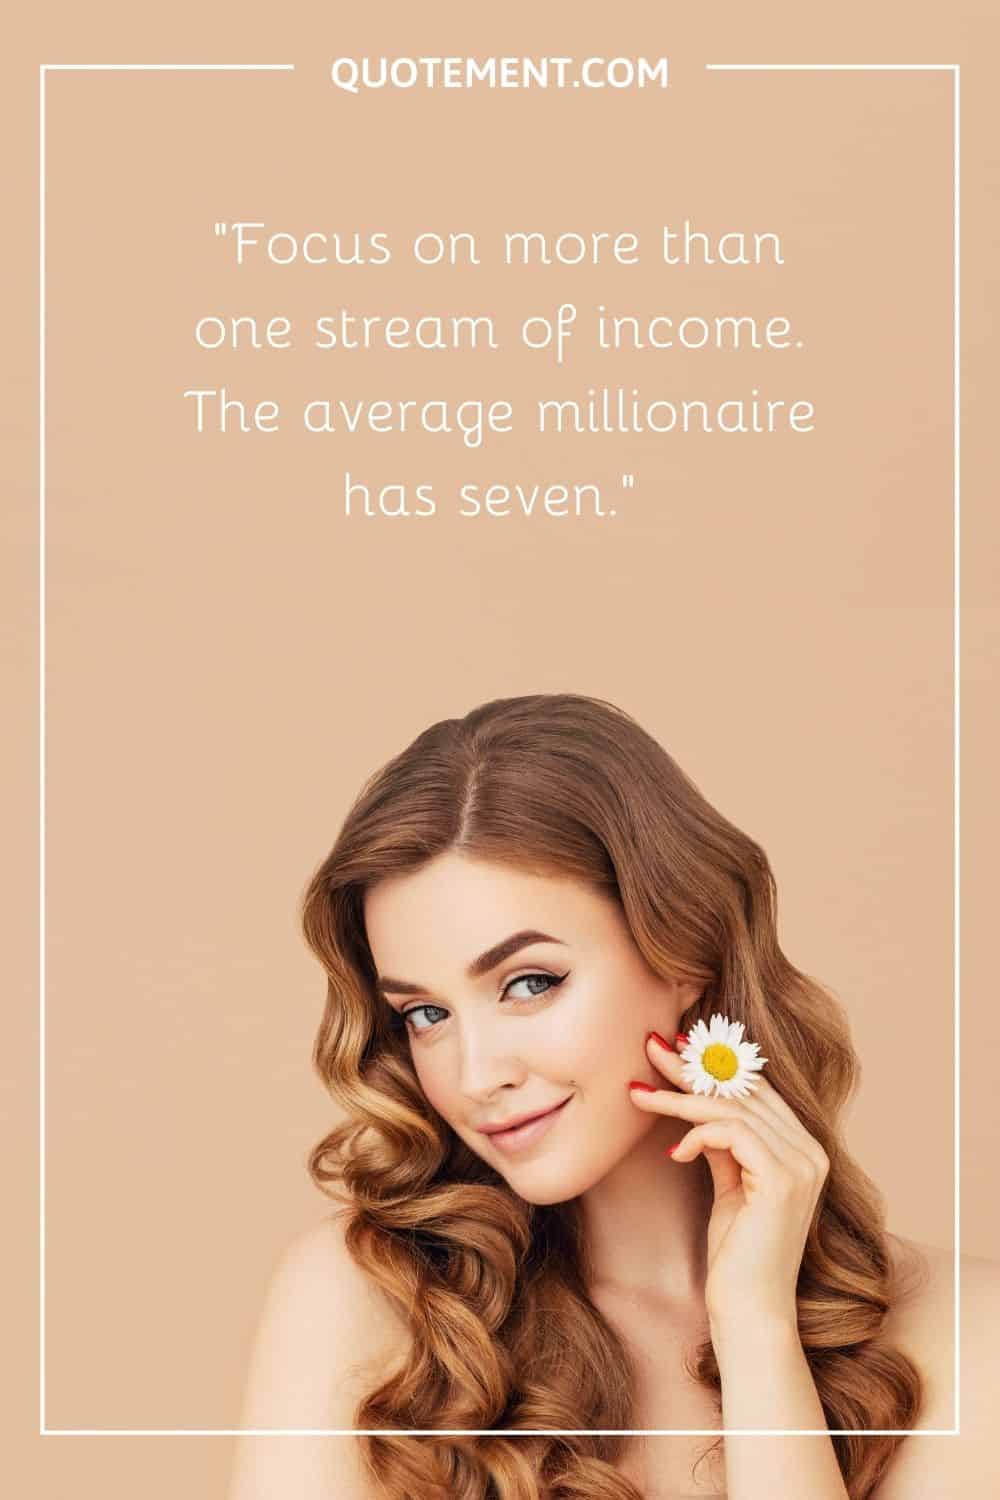 Focus on more than one stream of income.